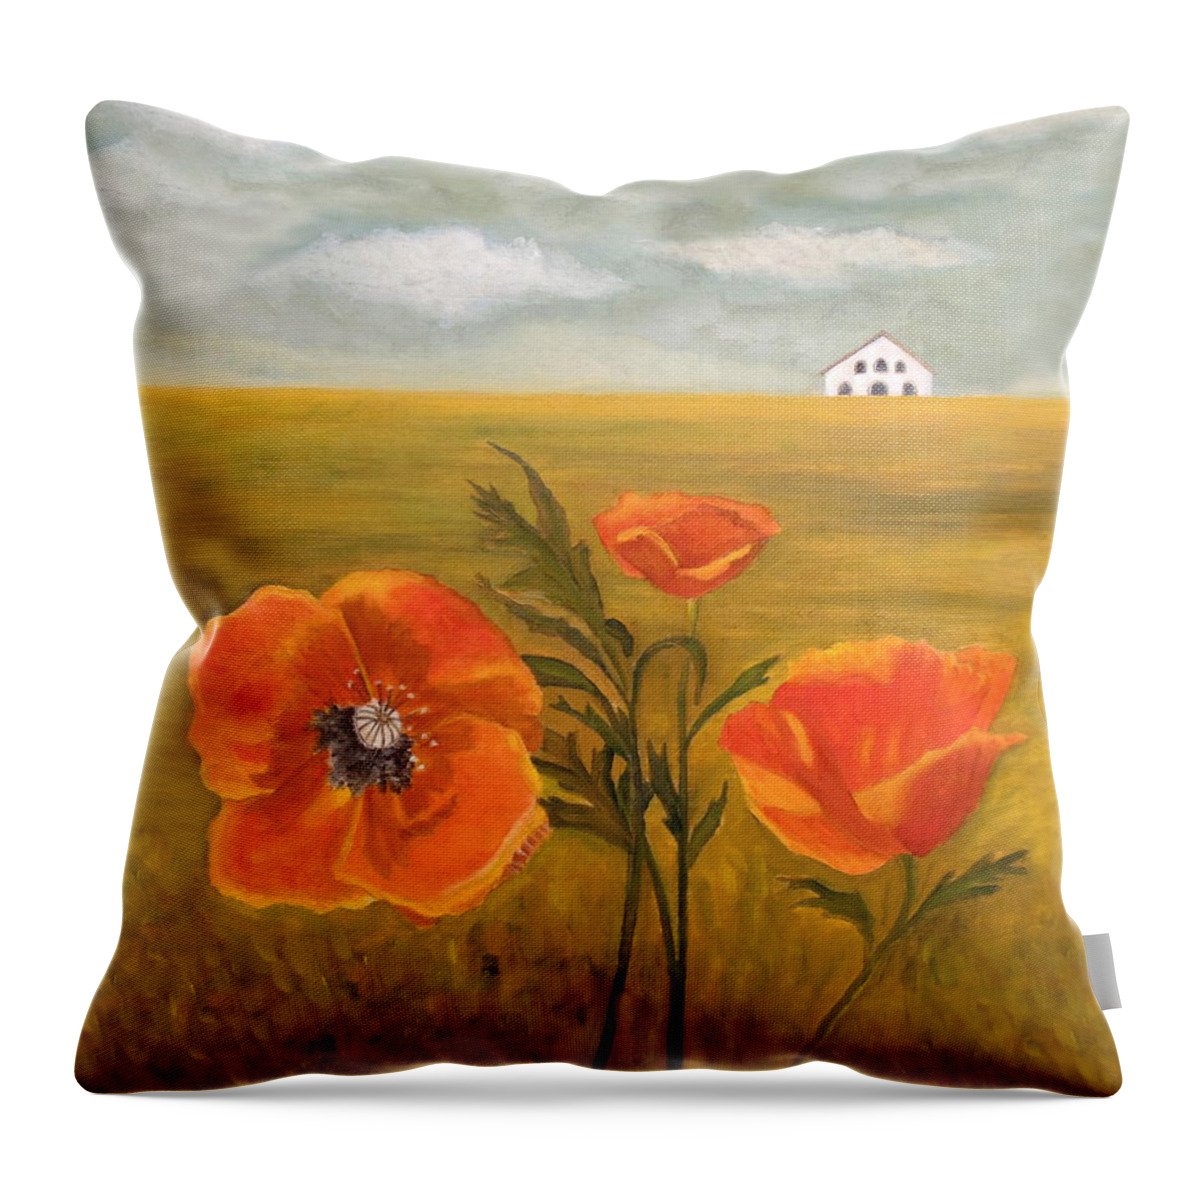 Poppies Throw Pillow featuring the painting Springtime Storm by Angeles M Pomata